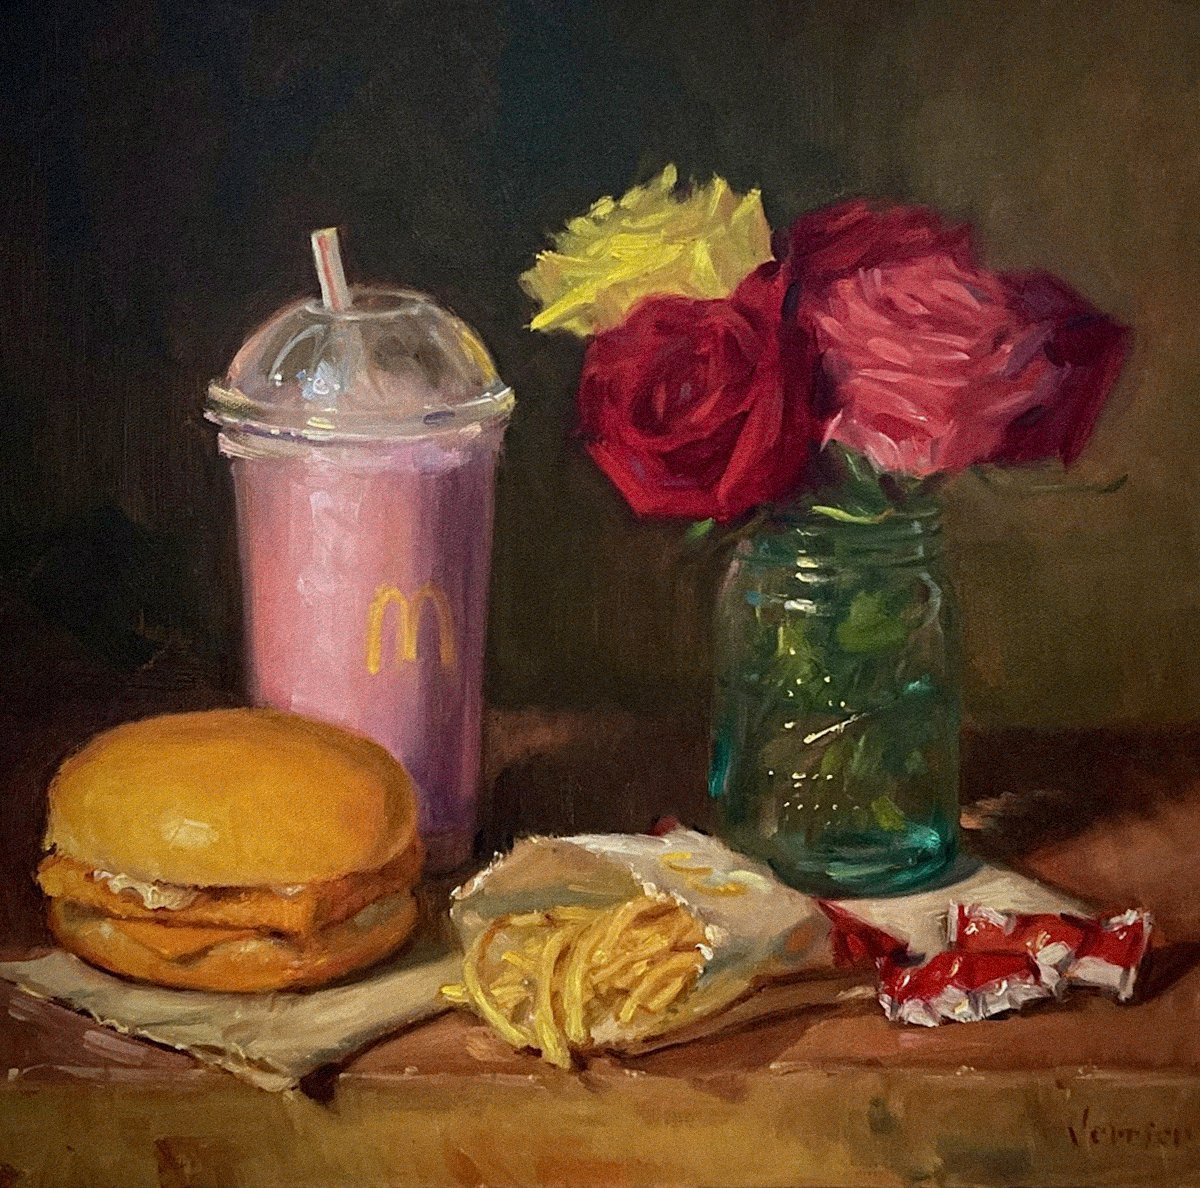 vampire-eros:
“pittipedia:
“ ‘McDonald’s Filet-O-Fish w/Strawberry Shake & Fries’ by Noah Verrier (2022)
”
i like the strong use of yellow and the unusually long fries, as it resembles old paintings where it was basically a flex to use lots of yellow...